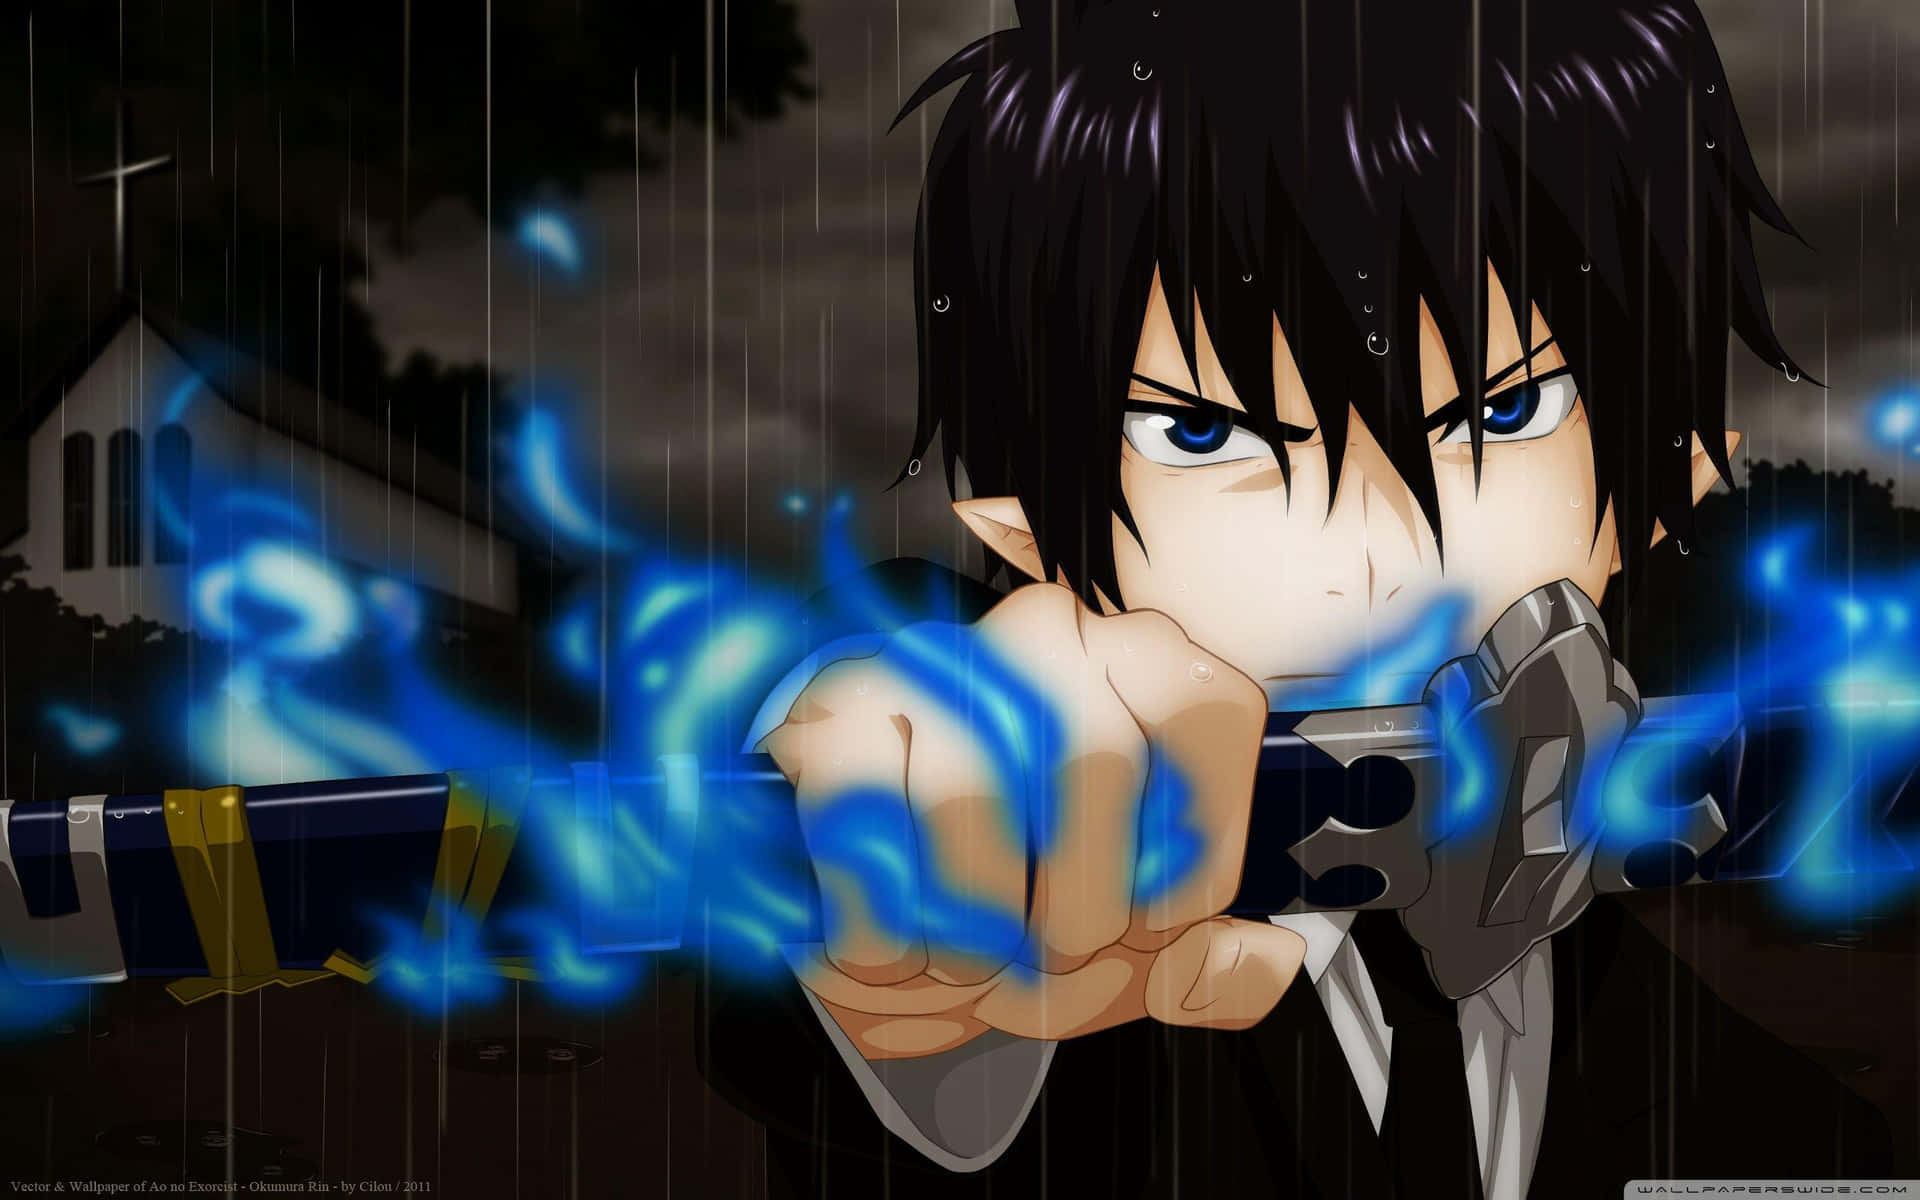 Rin Okumura, the protagonist of Blue Exorcist